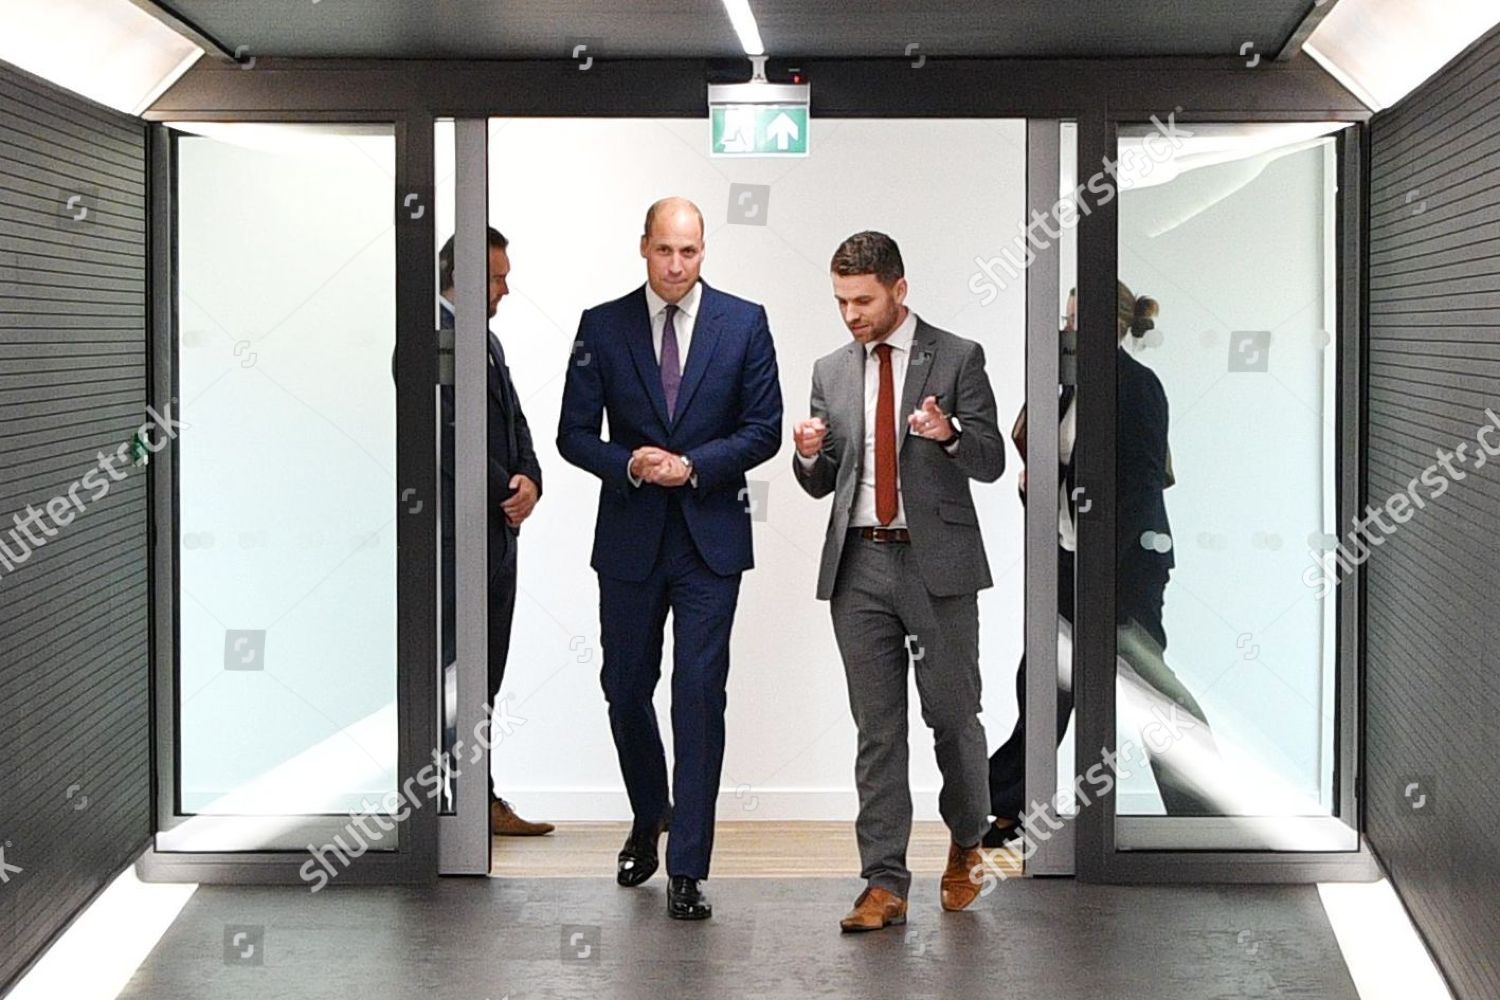 prince-william-visit-to-the-great-exhibition-of-the-north-newcastle-uk-shutterstock-editorial-9876077a.jpg